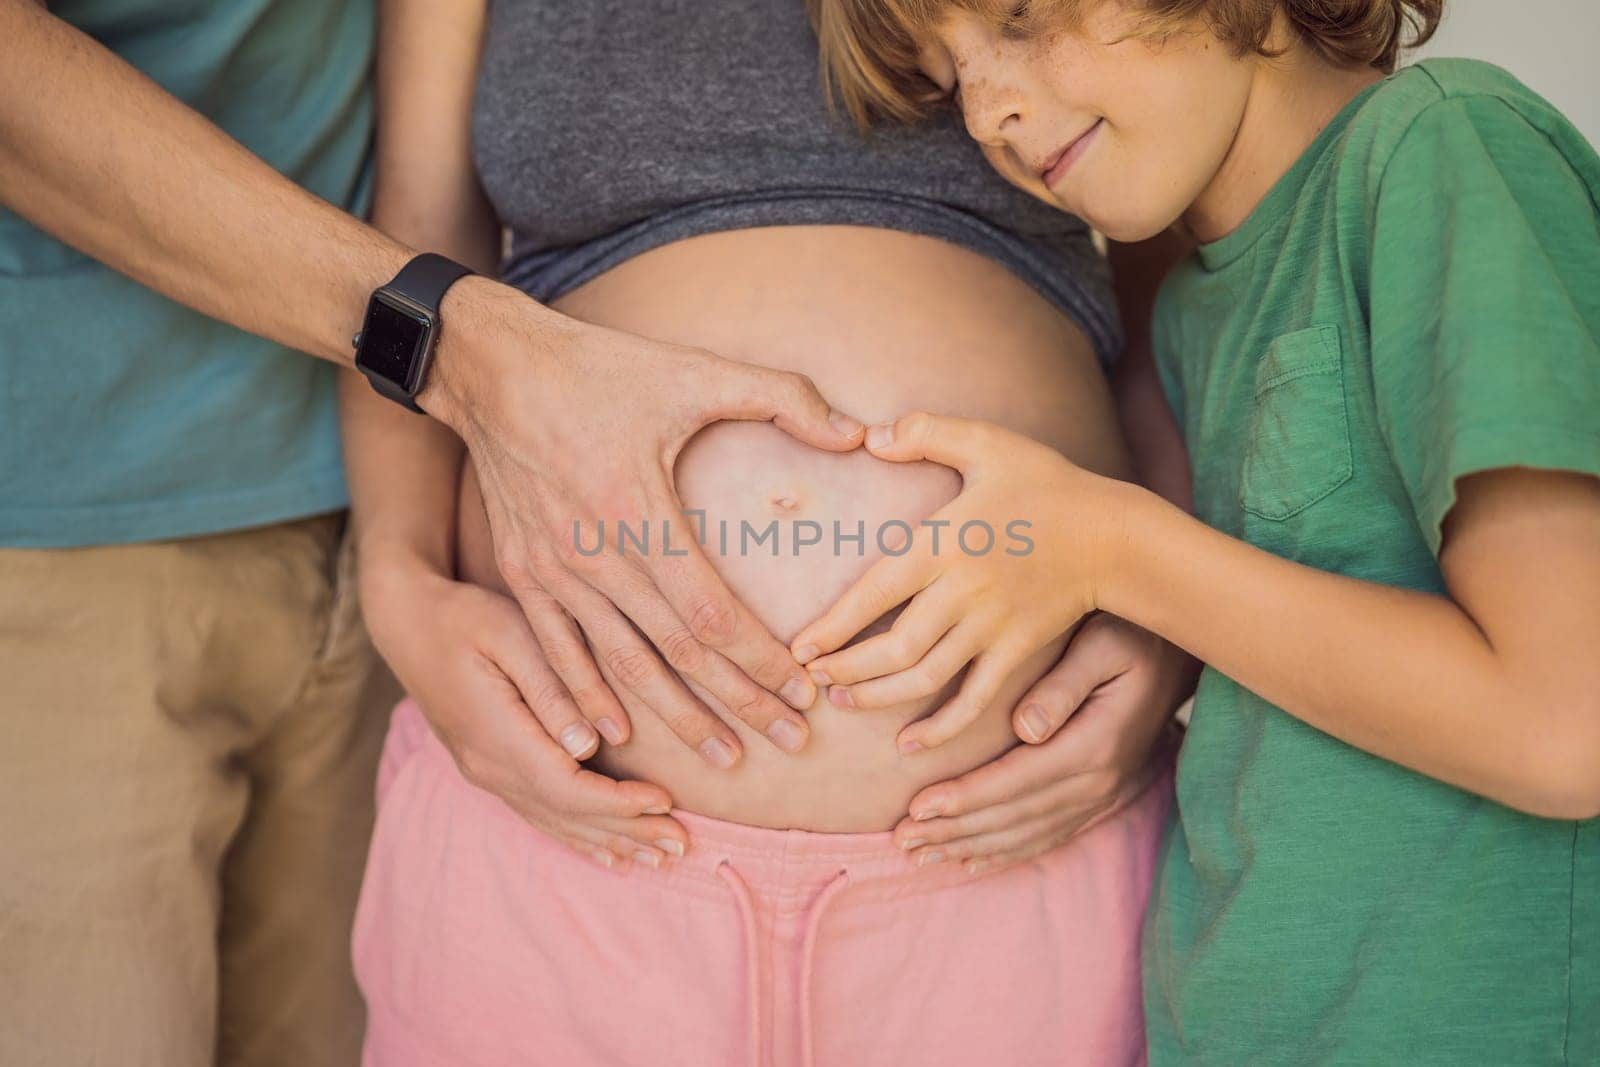 Pregnant Woman, father and first kid child holding hands in a heart shape on her baby bump. Pregnant Belly with fingers Heart symbol by galitskaya